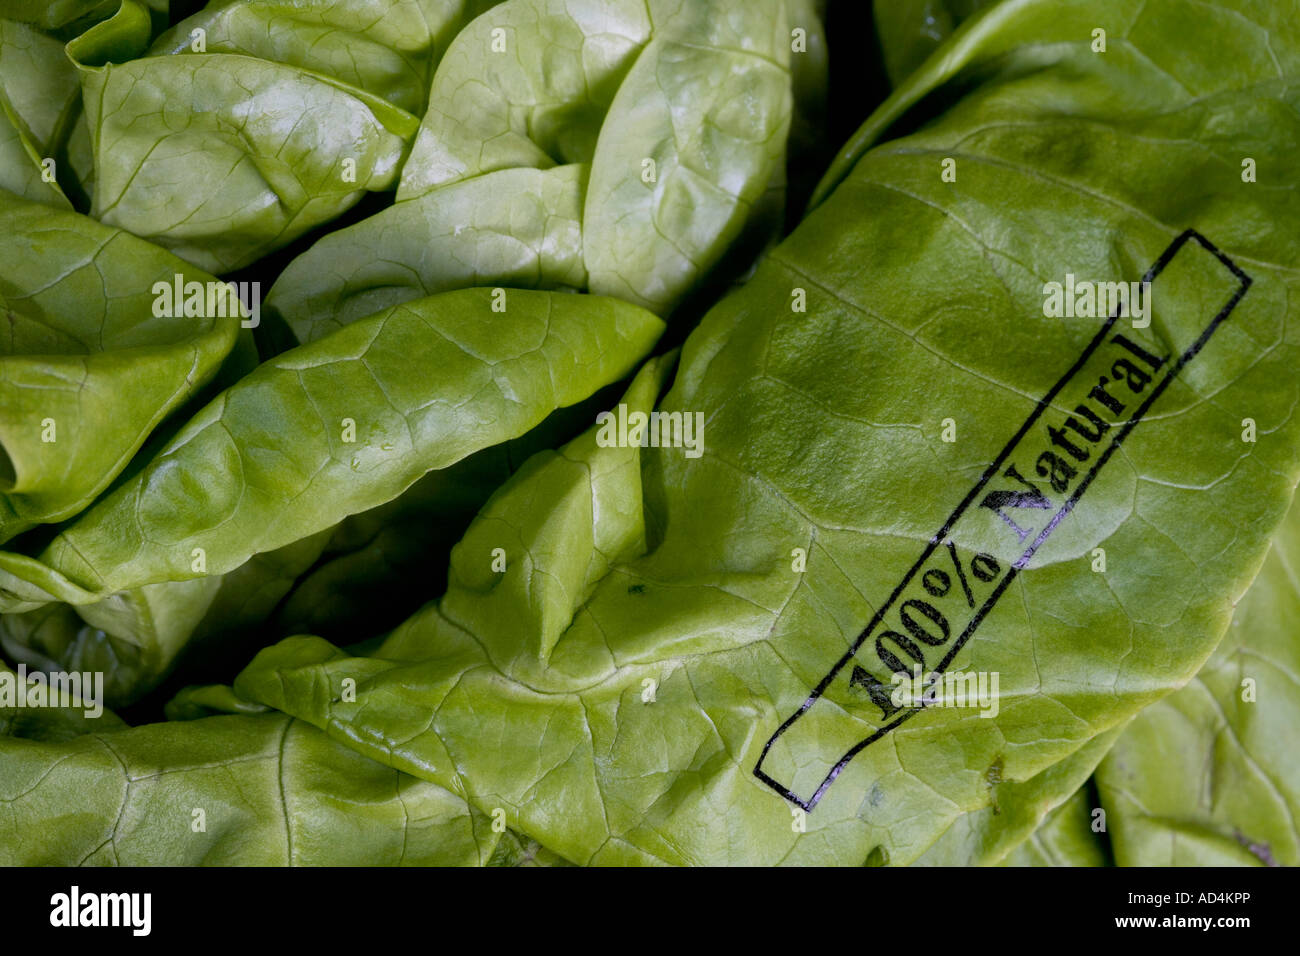 Butter lettuce stamped '100% Natural' Stock Photo